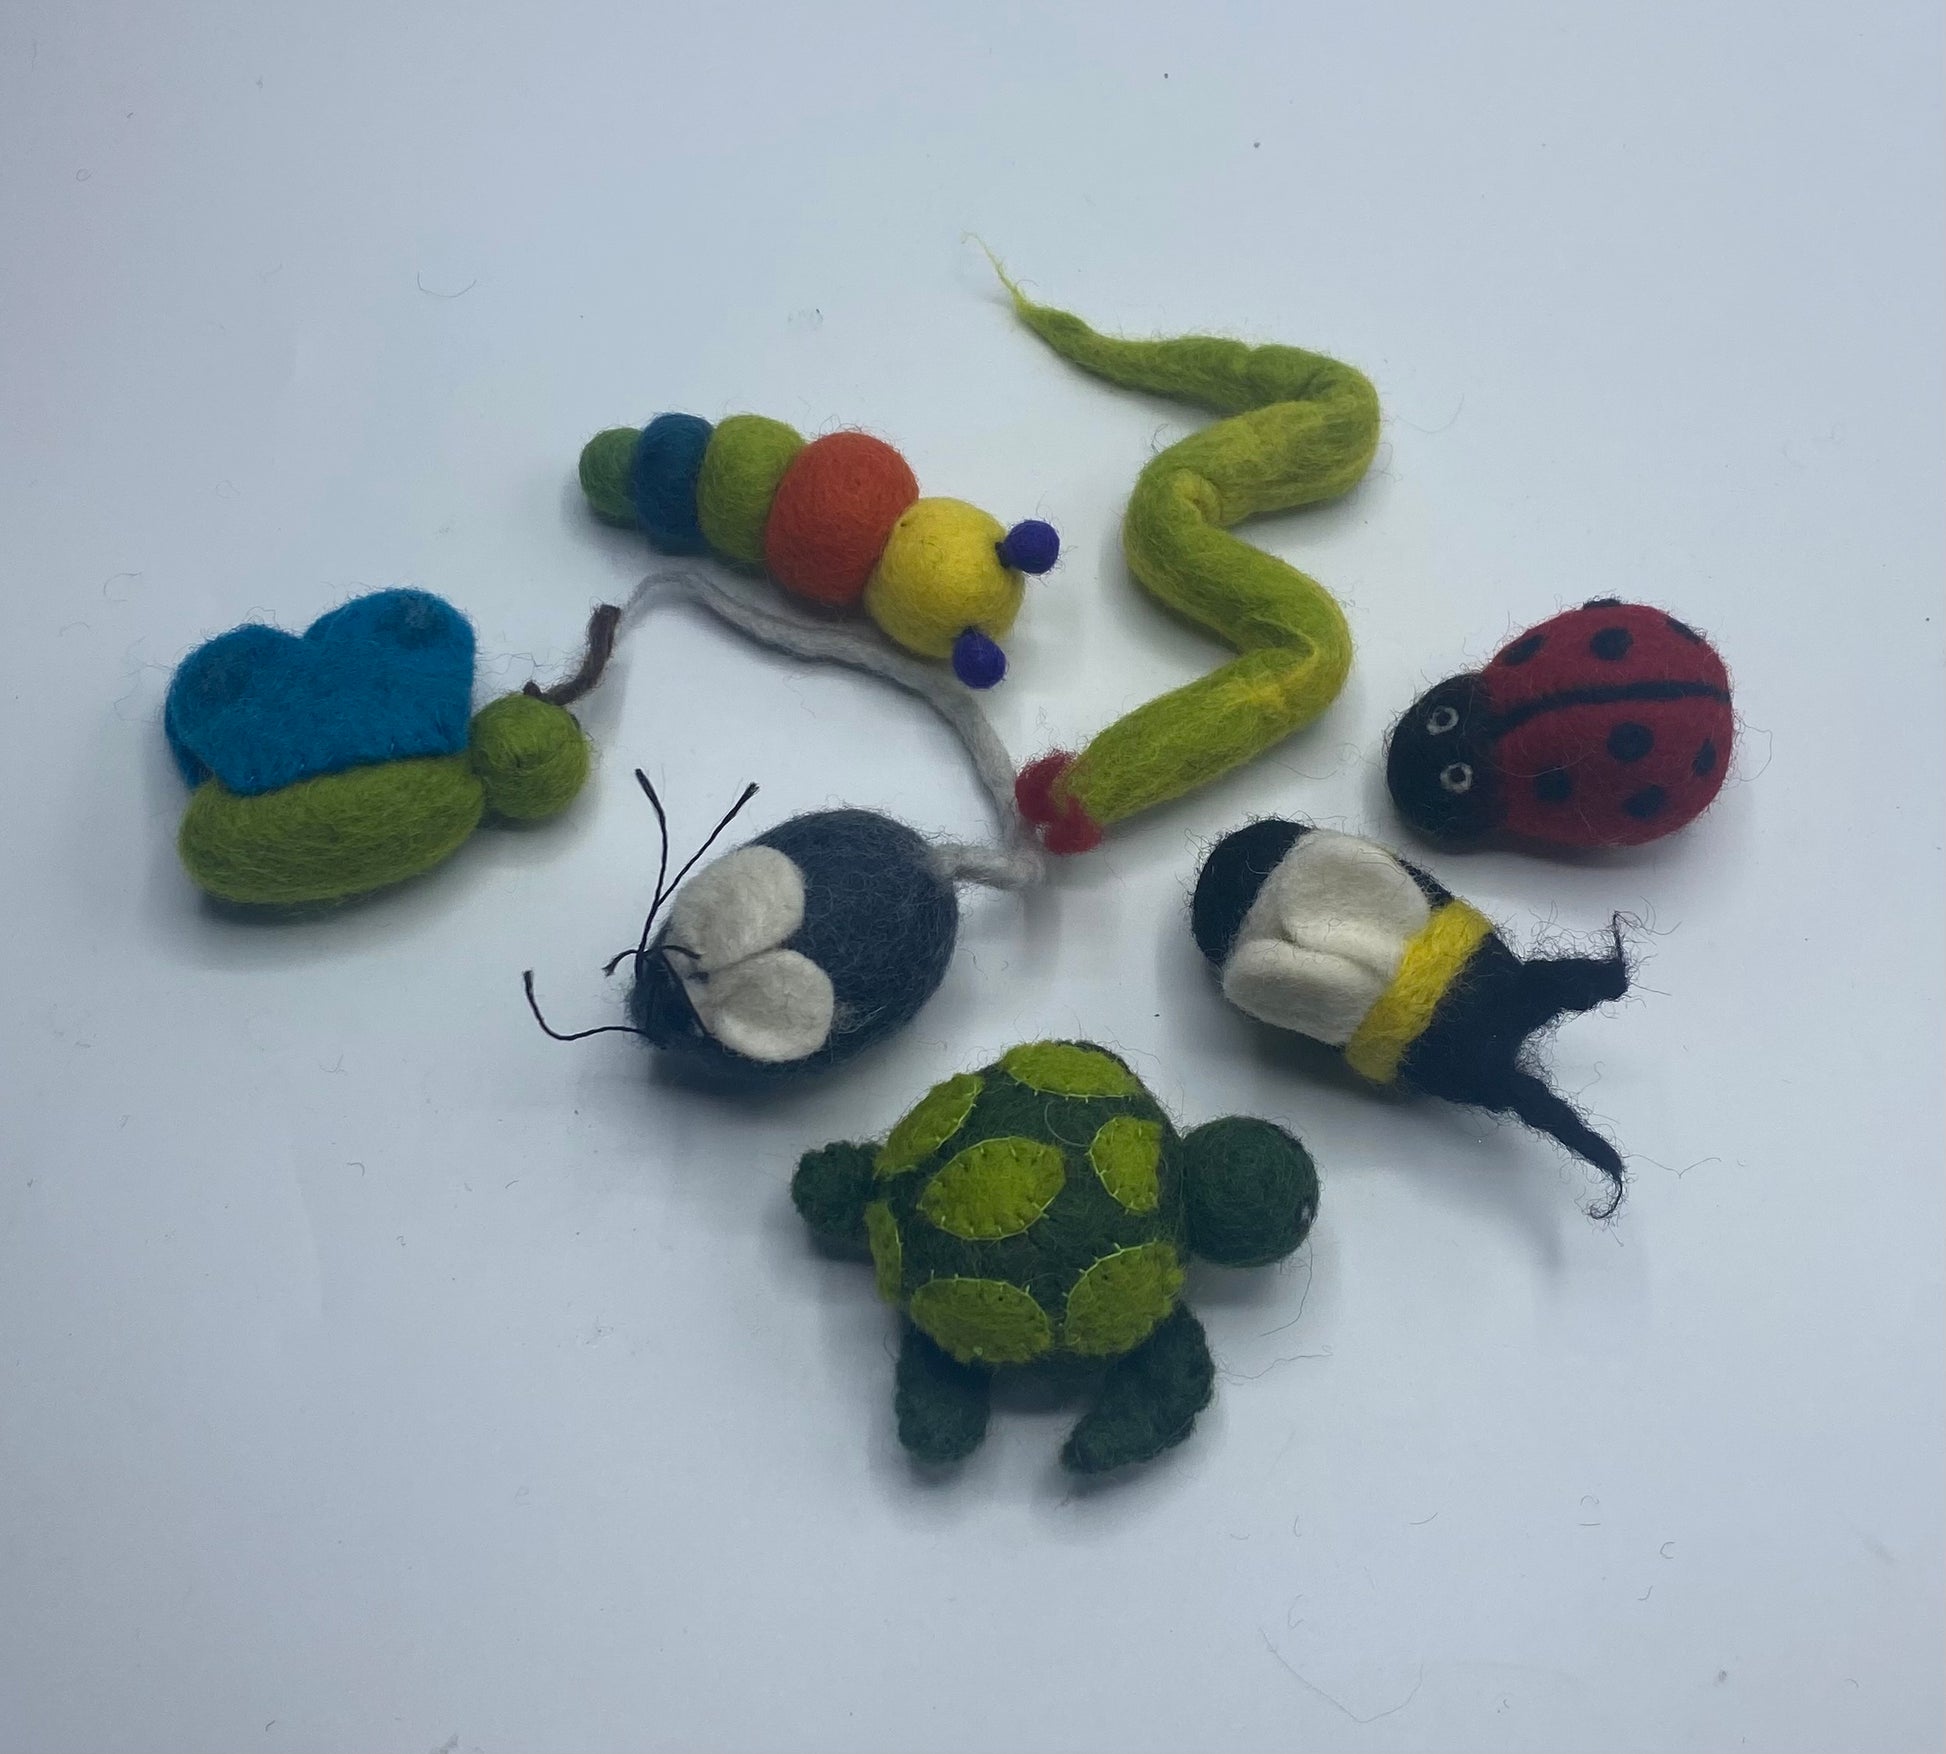 Felted backyard Cat toy.